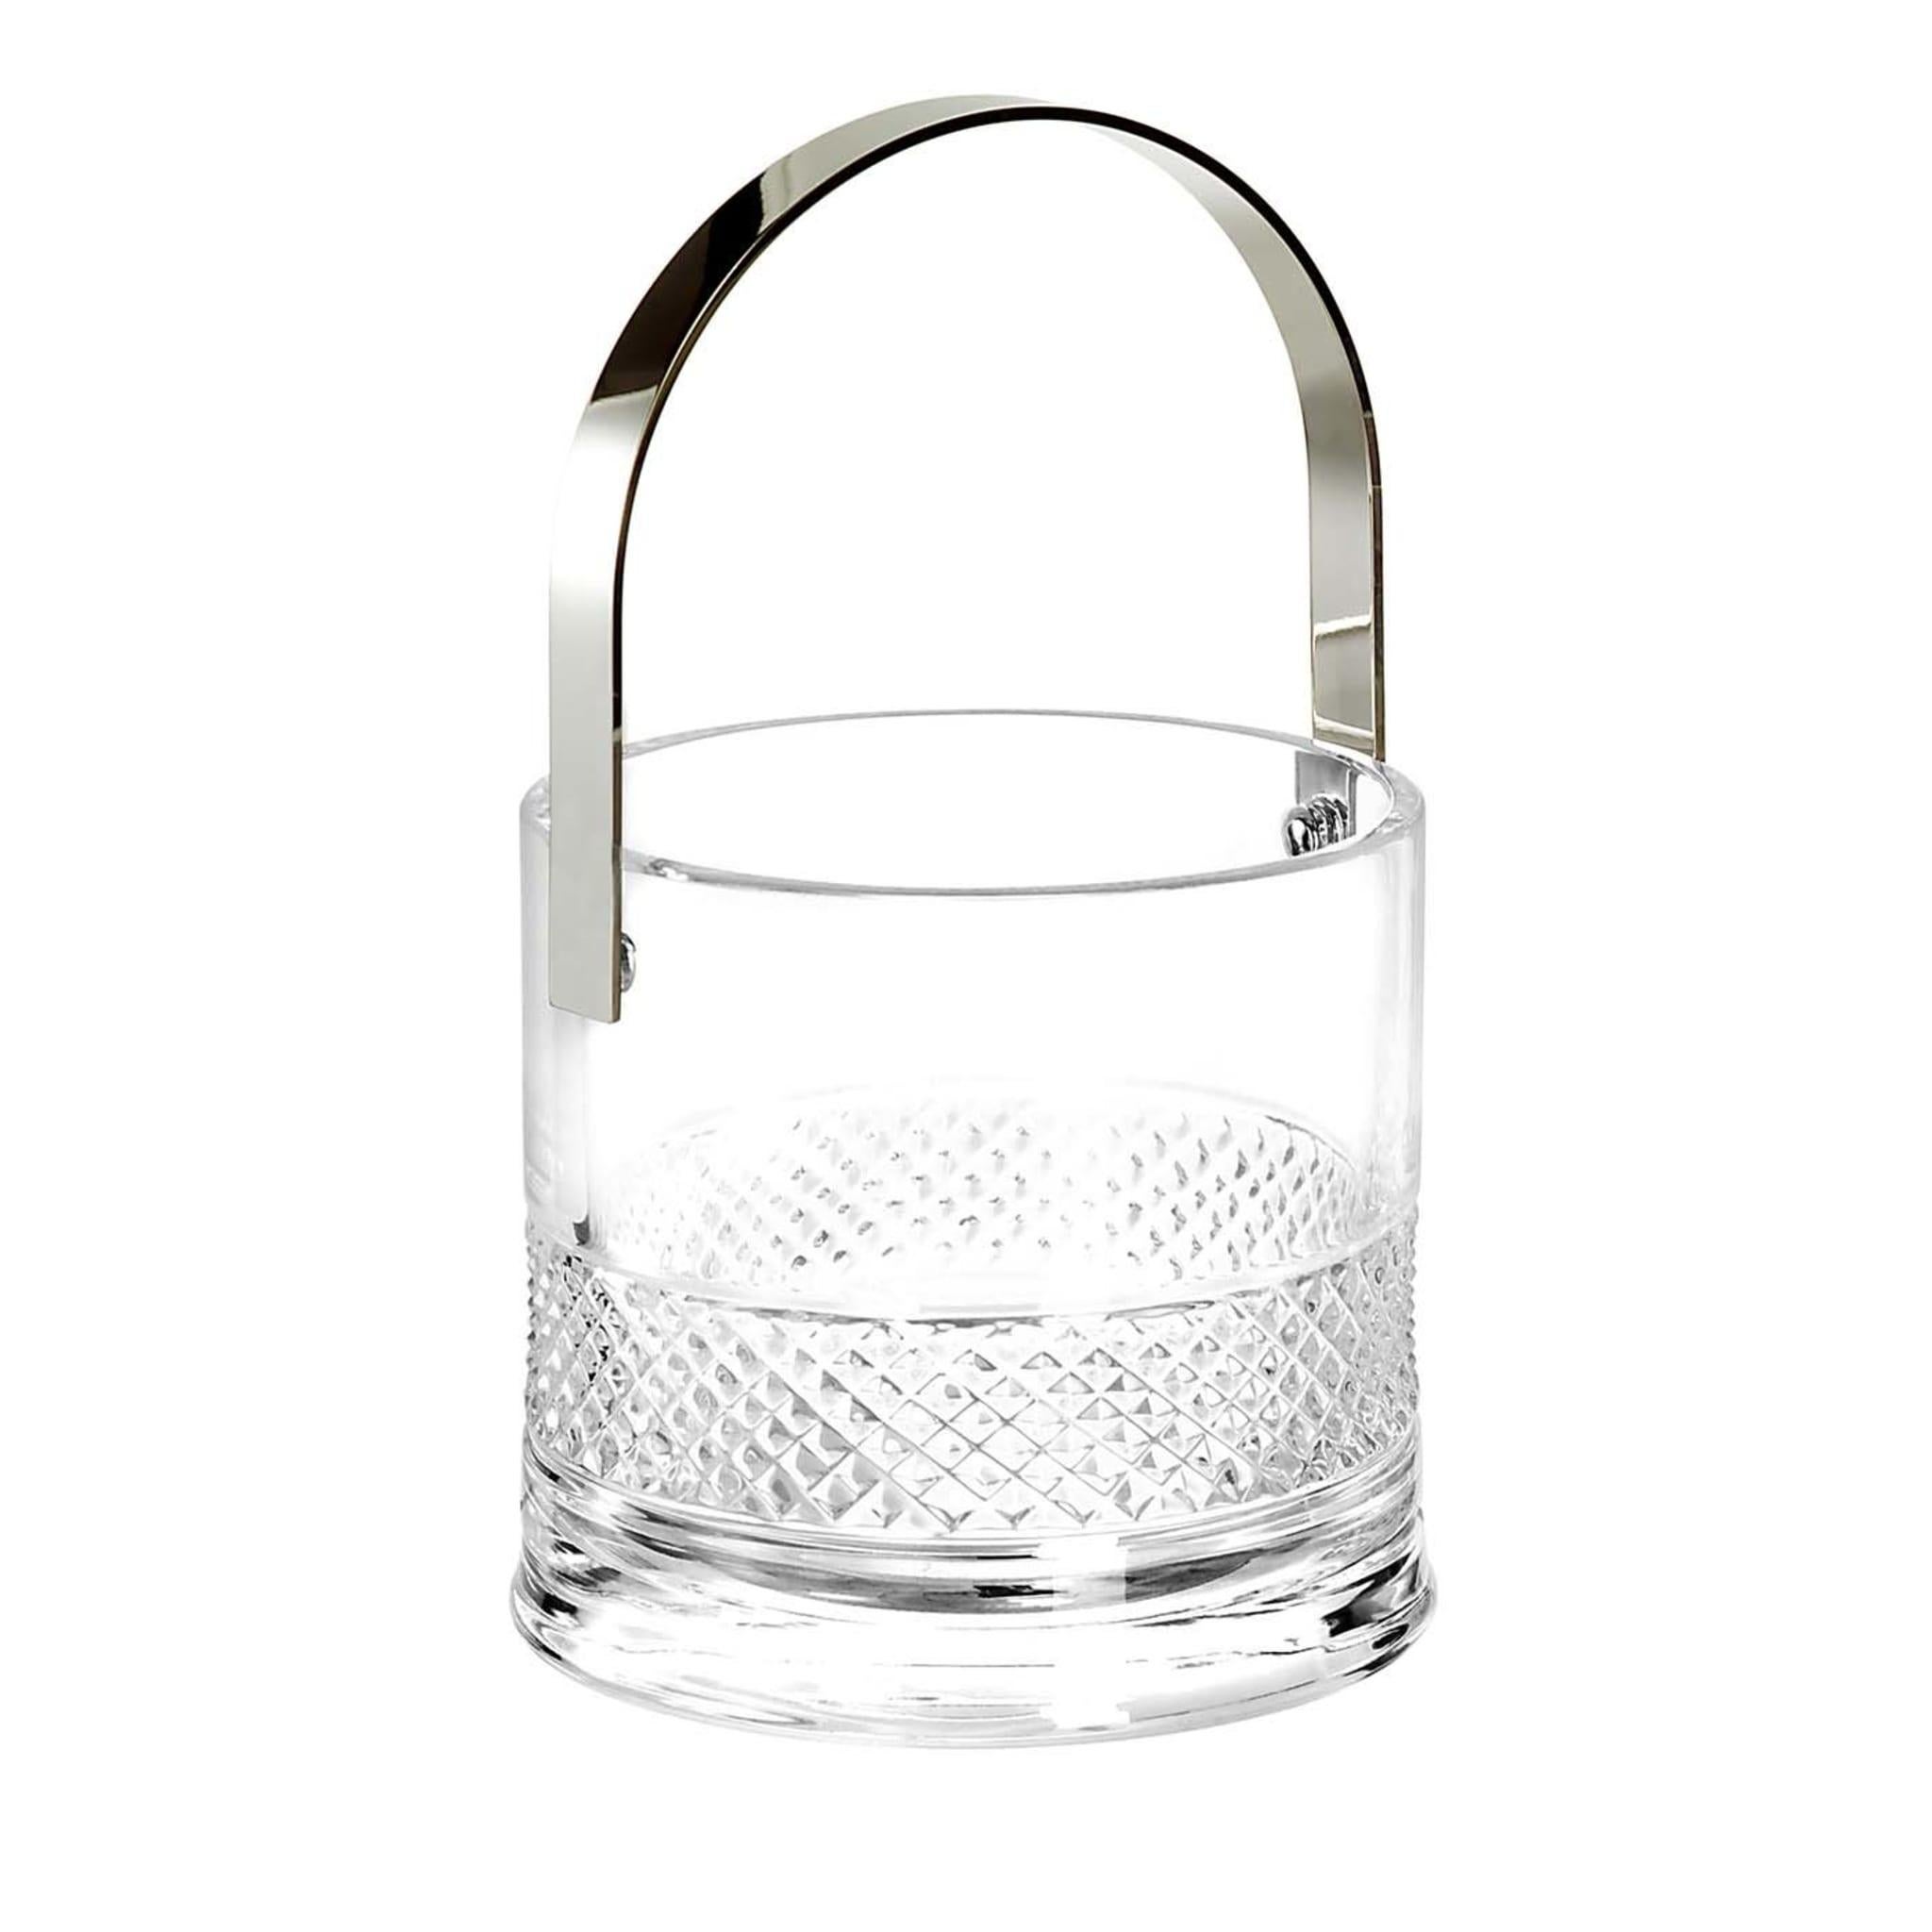 Designed by Claire Le Sage in 2004, this ice bucket is part of the Diamond collection, called after the superb textural decoration that graces its pieces and whose pattern is based on a diamond shape. An exquisite celebration of traditional